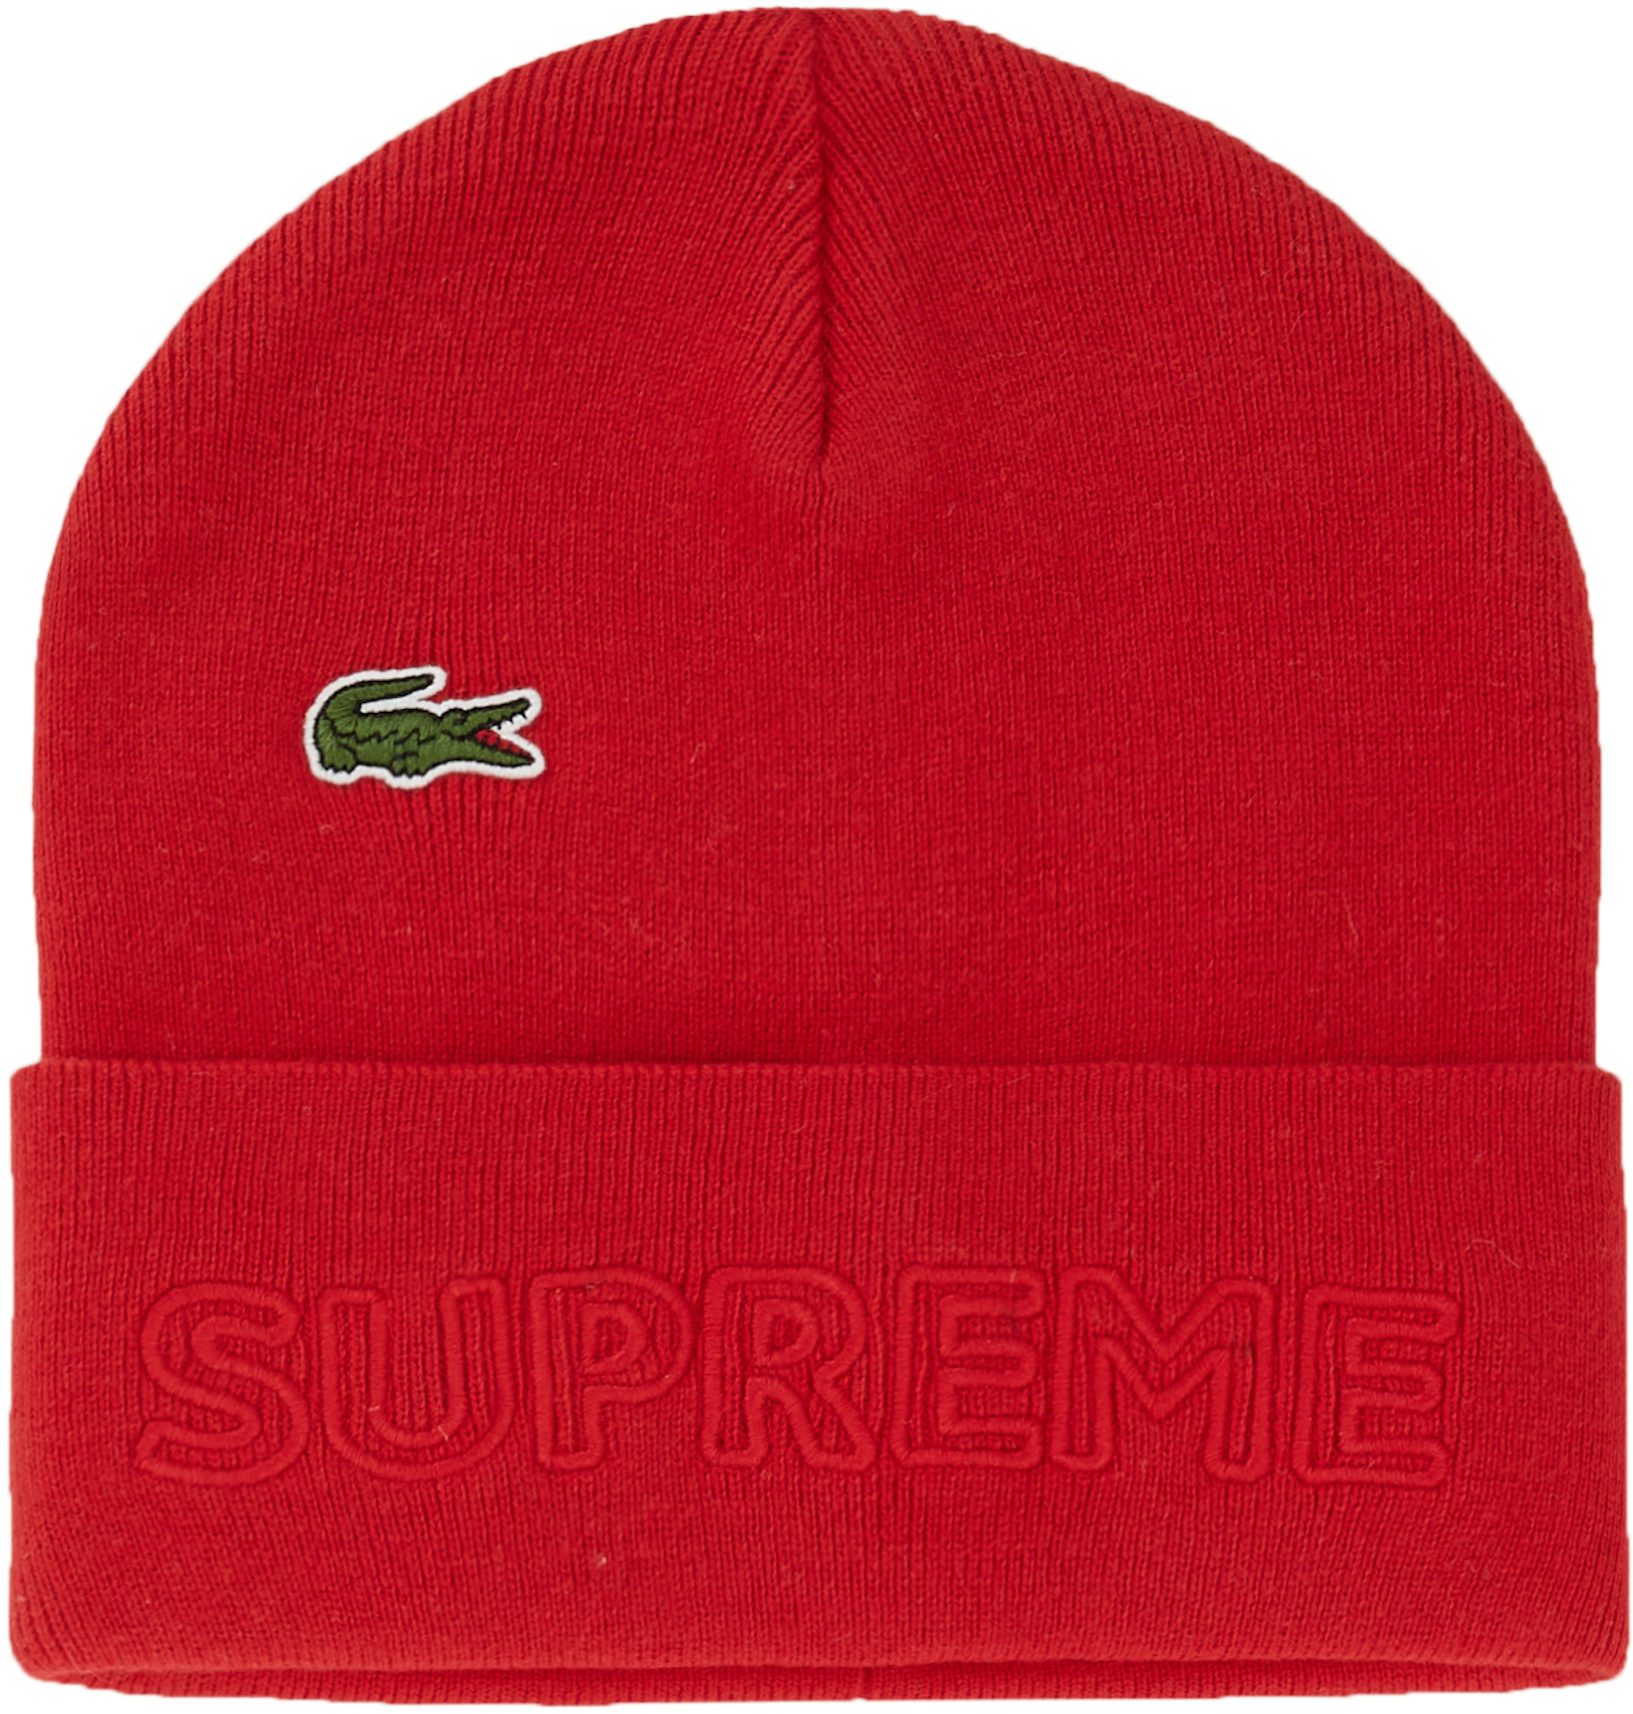 Supreme LACOSTE Beanie US - FW19 - Red